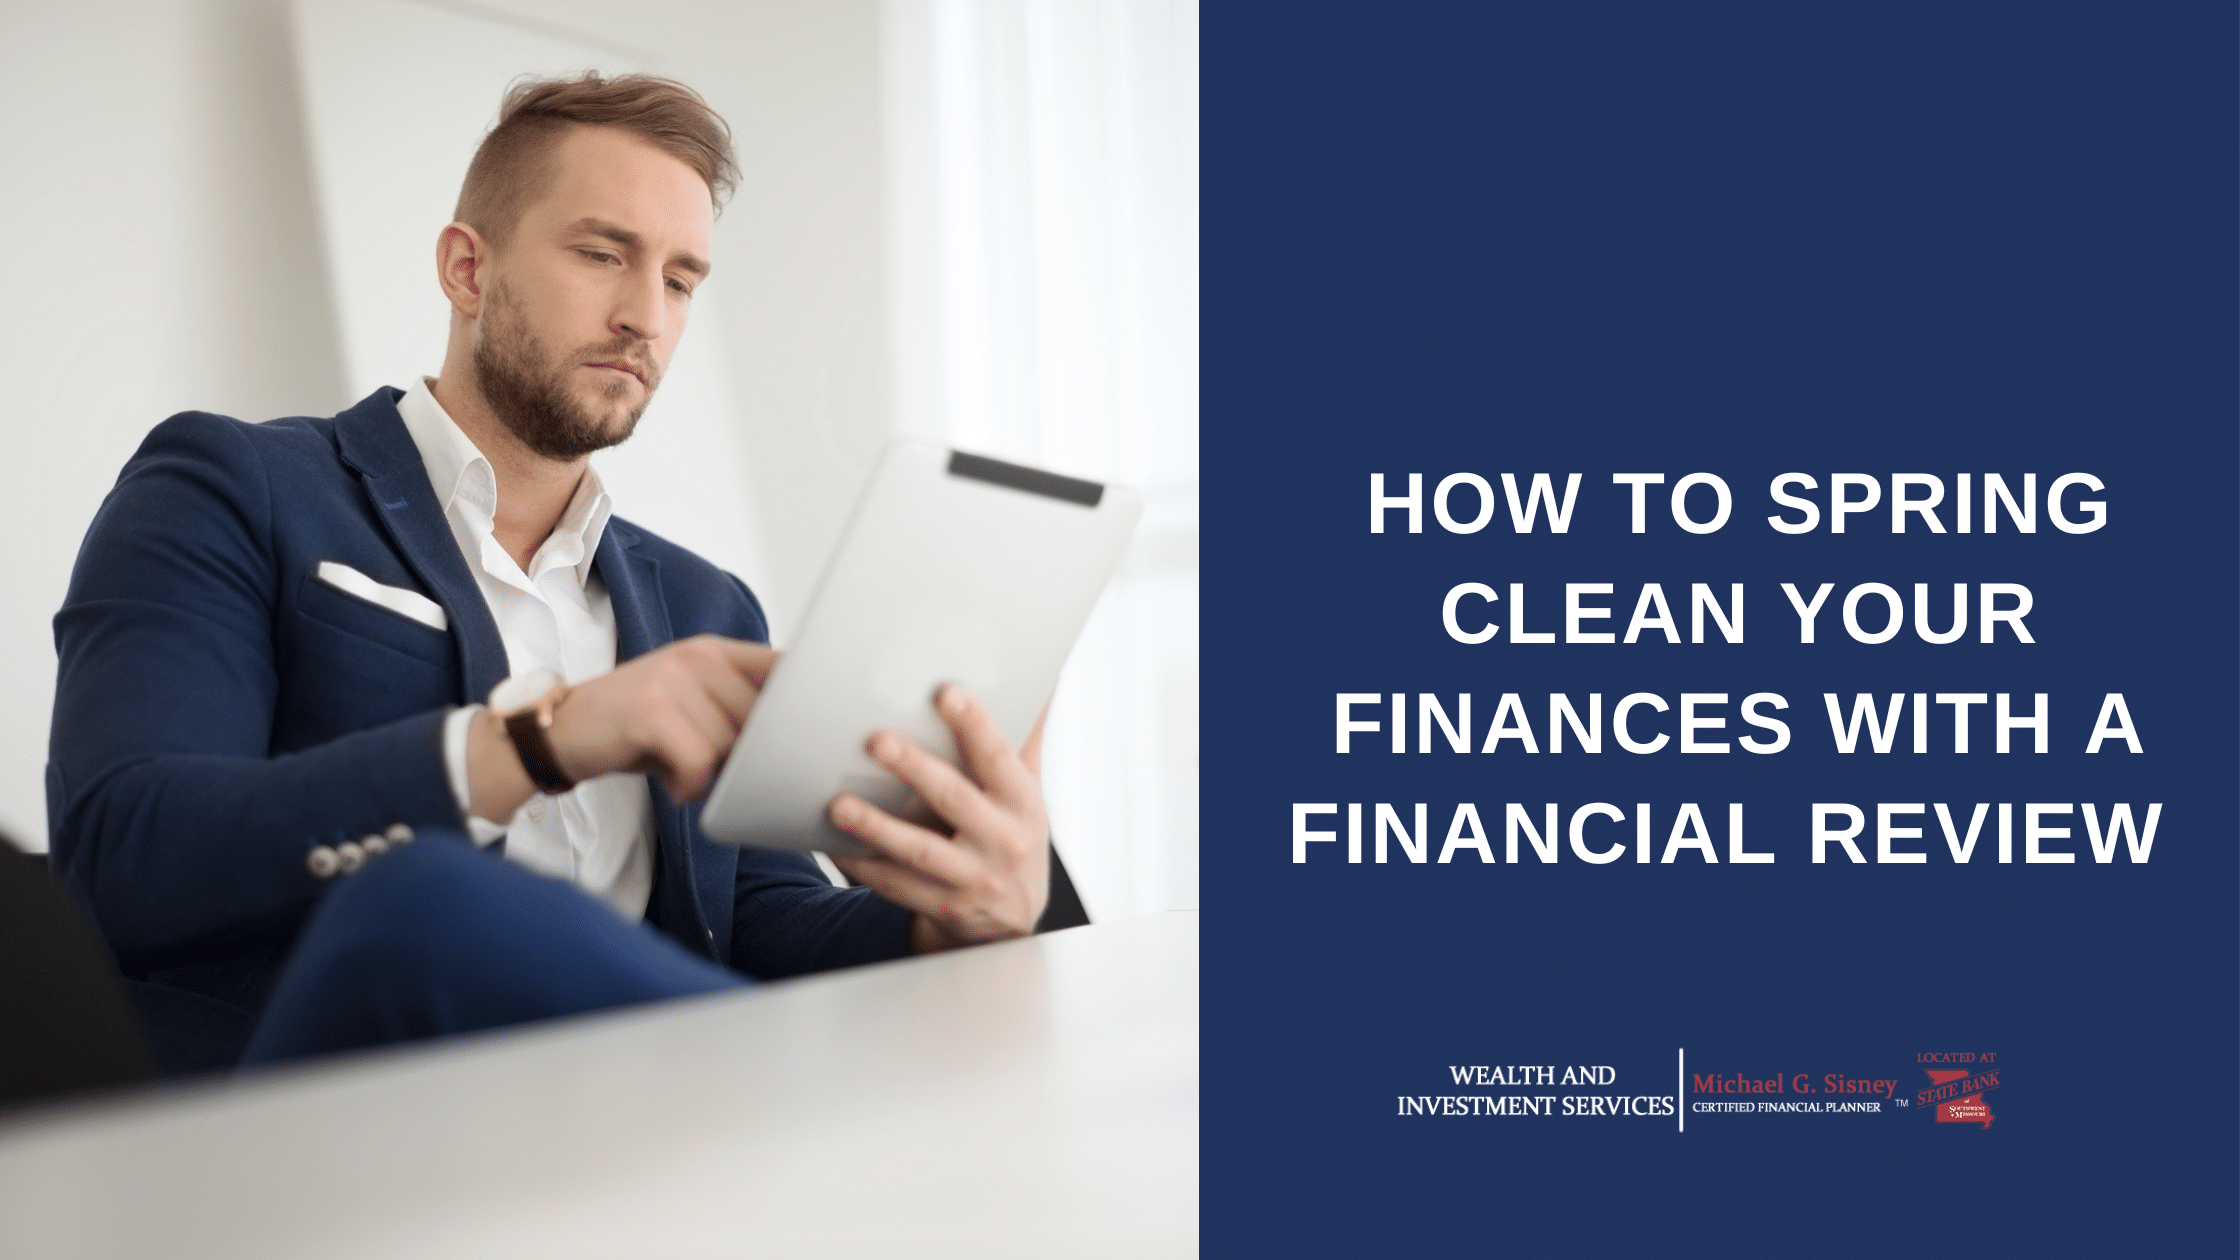 How to Spring Clean Your Finances with a Financial Review